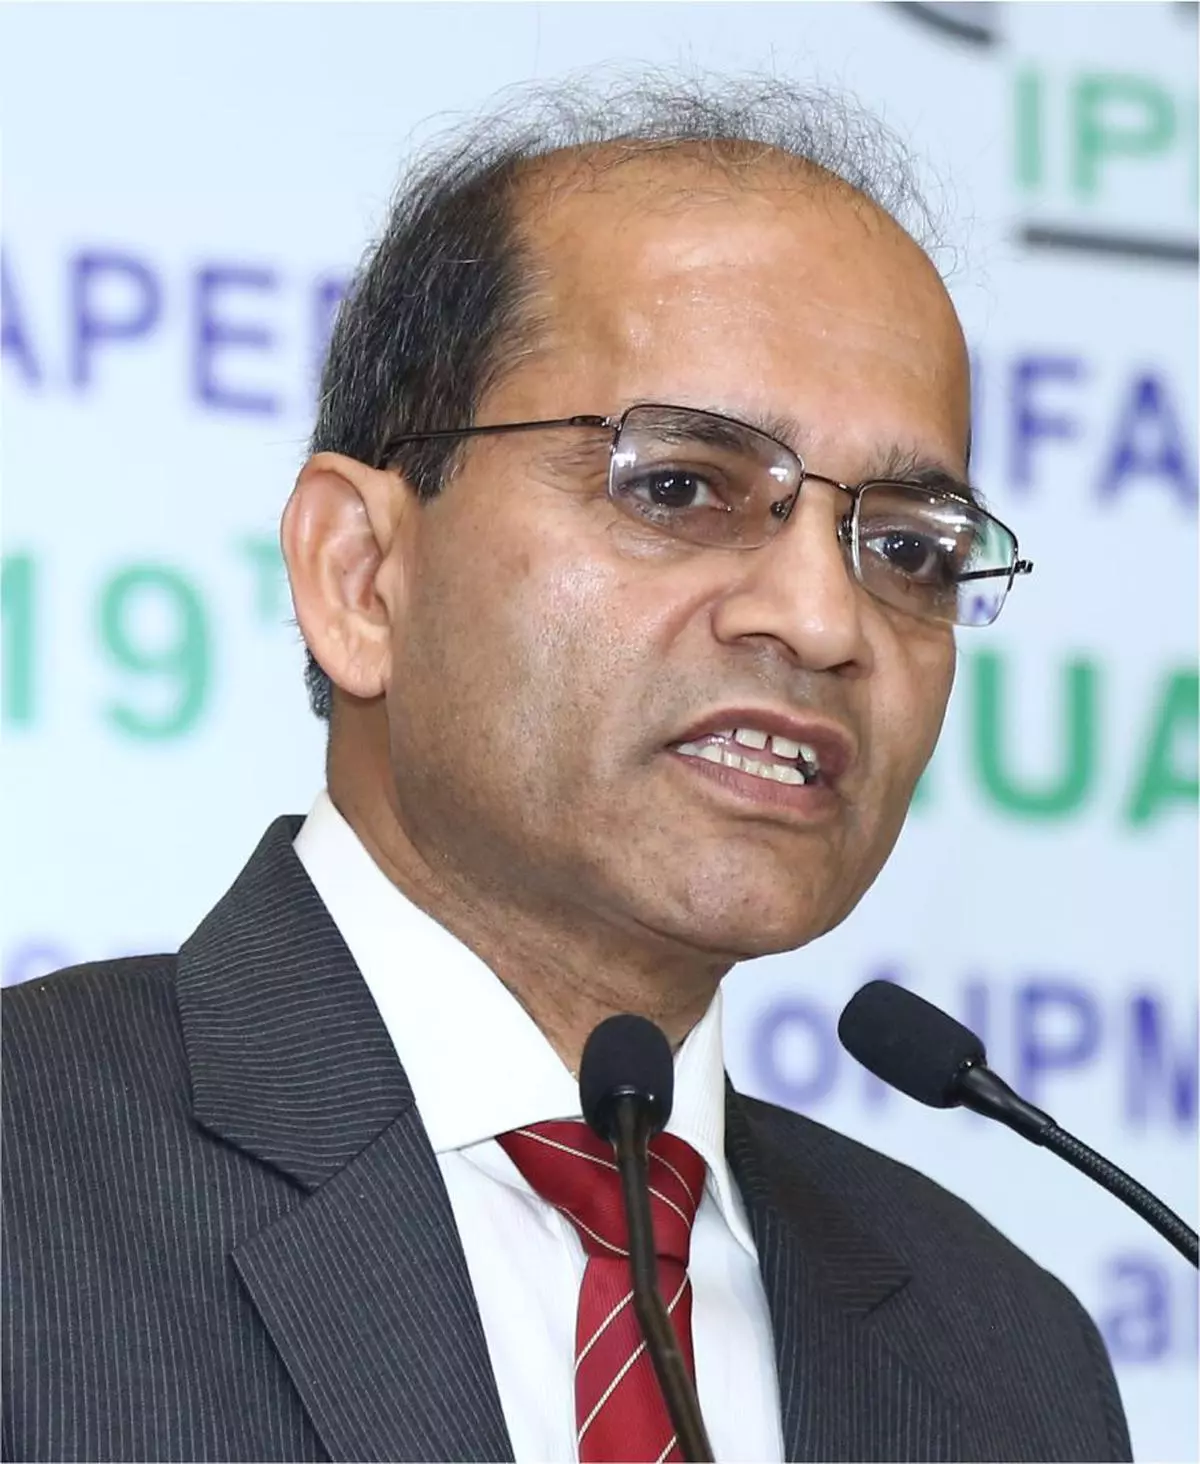 File Photo: A S Mehta, President, Indian Paper Manufacturers Association (IPMA)